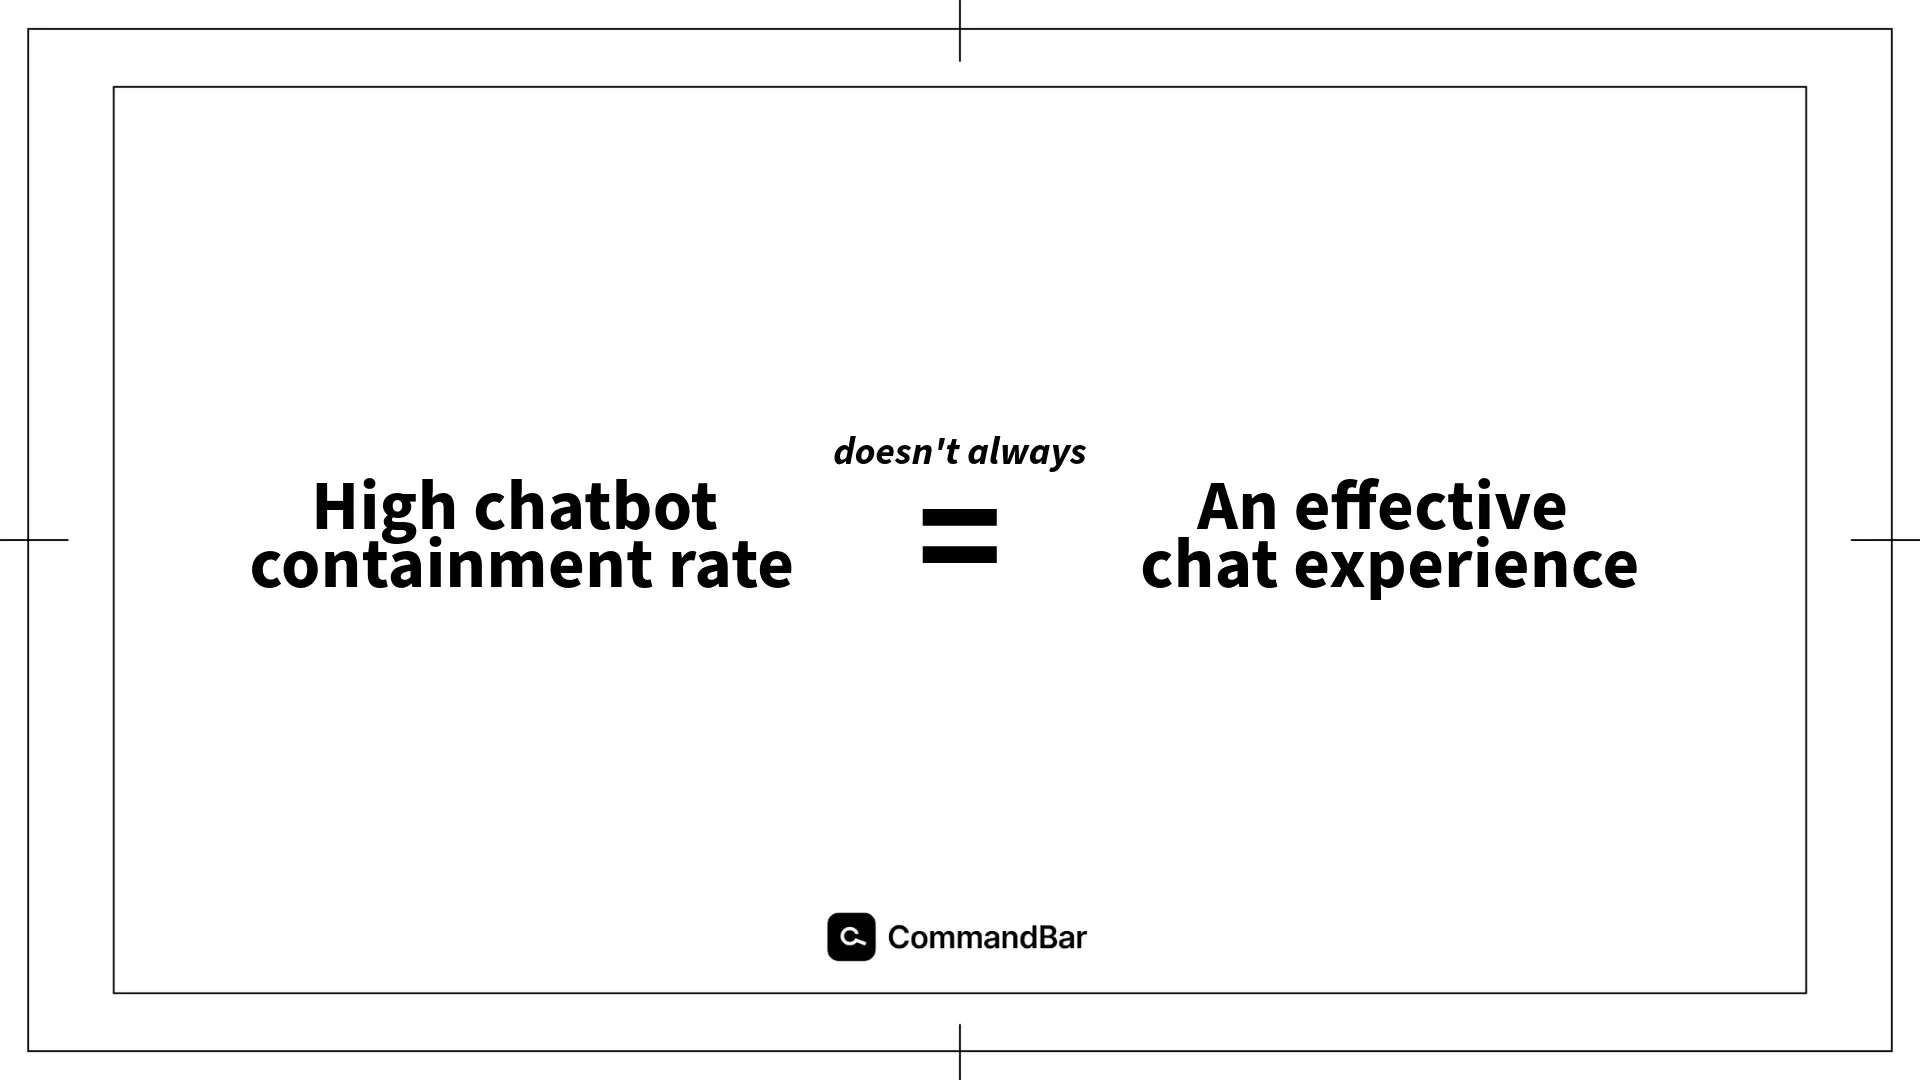 High chatbot containment rate doesn't always equal an effective chat experience